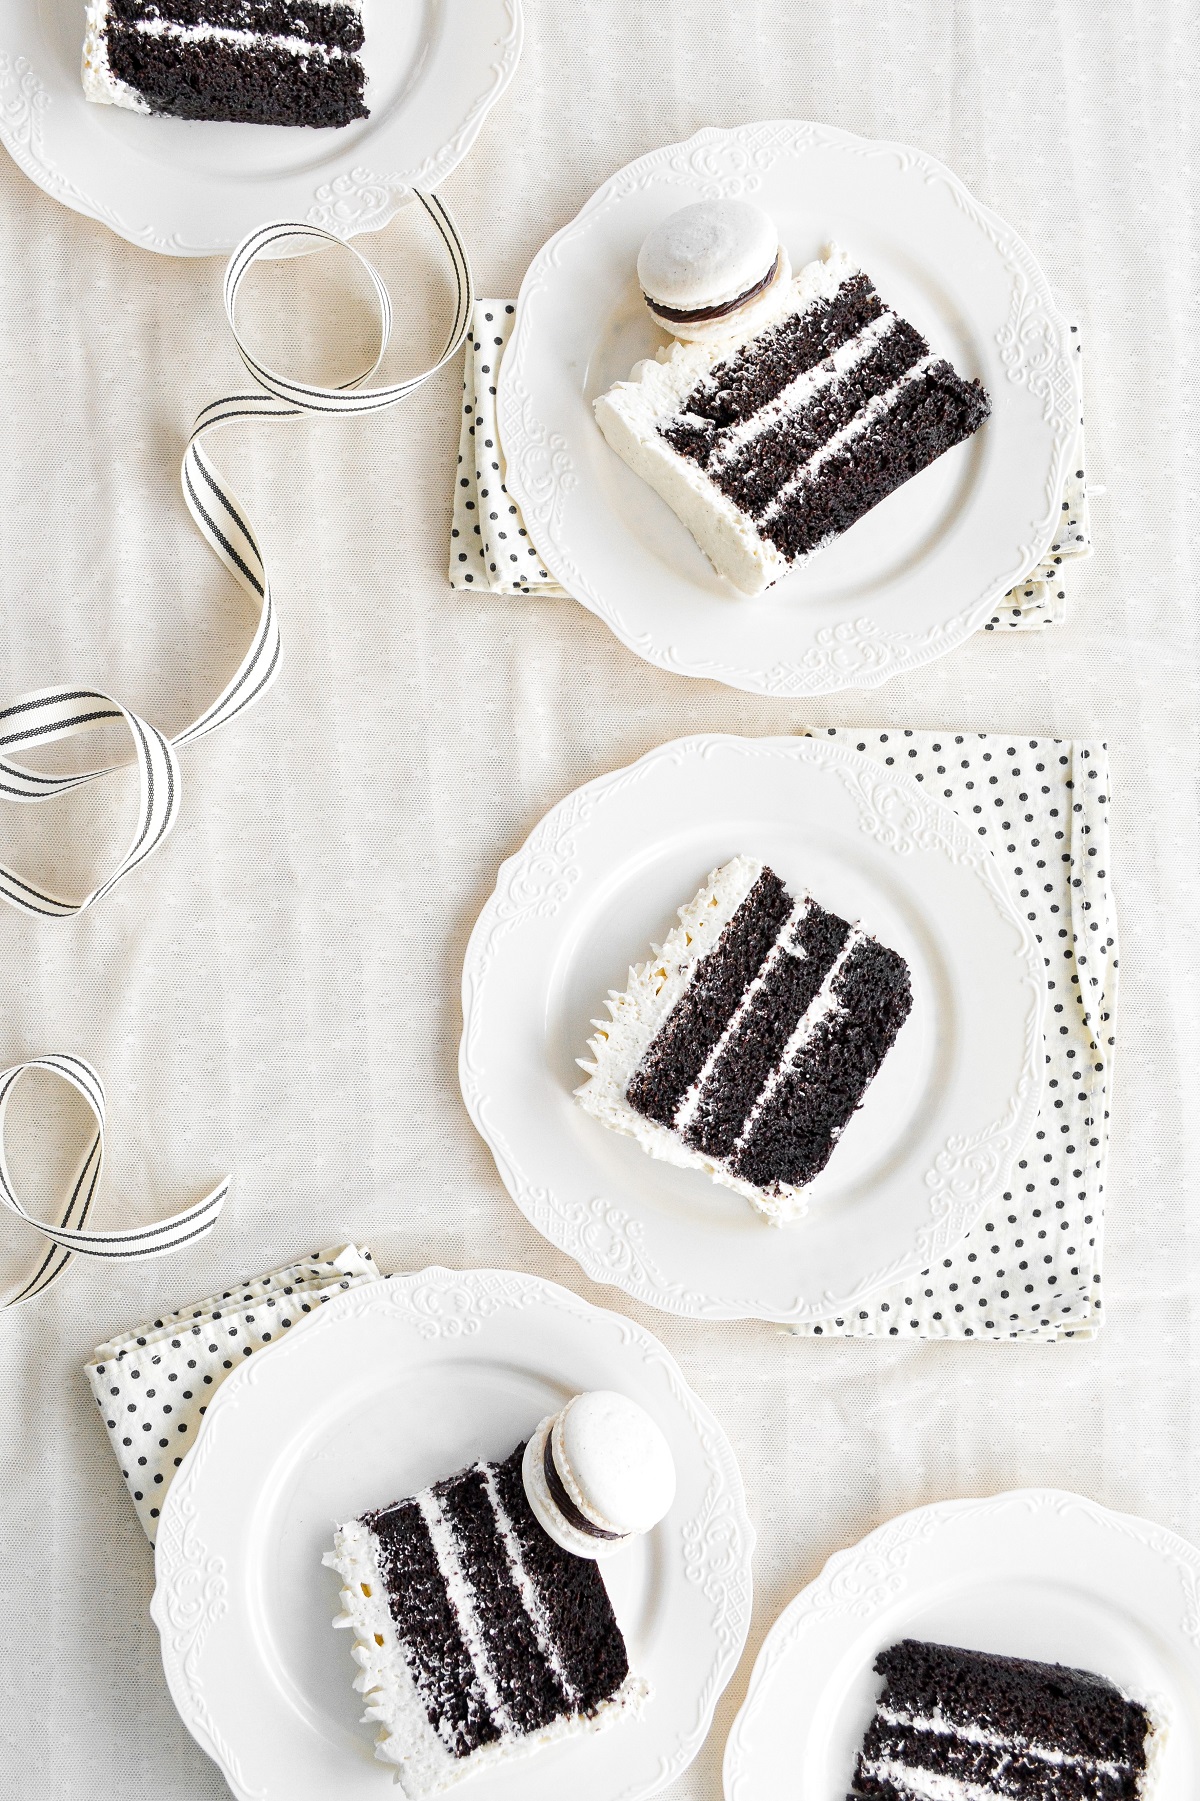 Five pieces of chocolate cake with vanilla buttercream, on white plates.